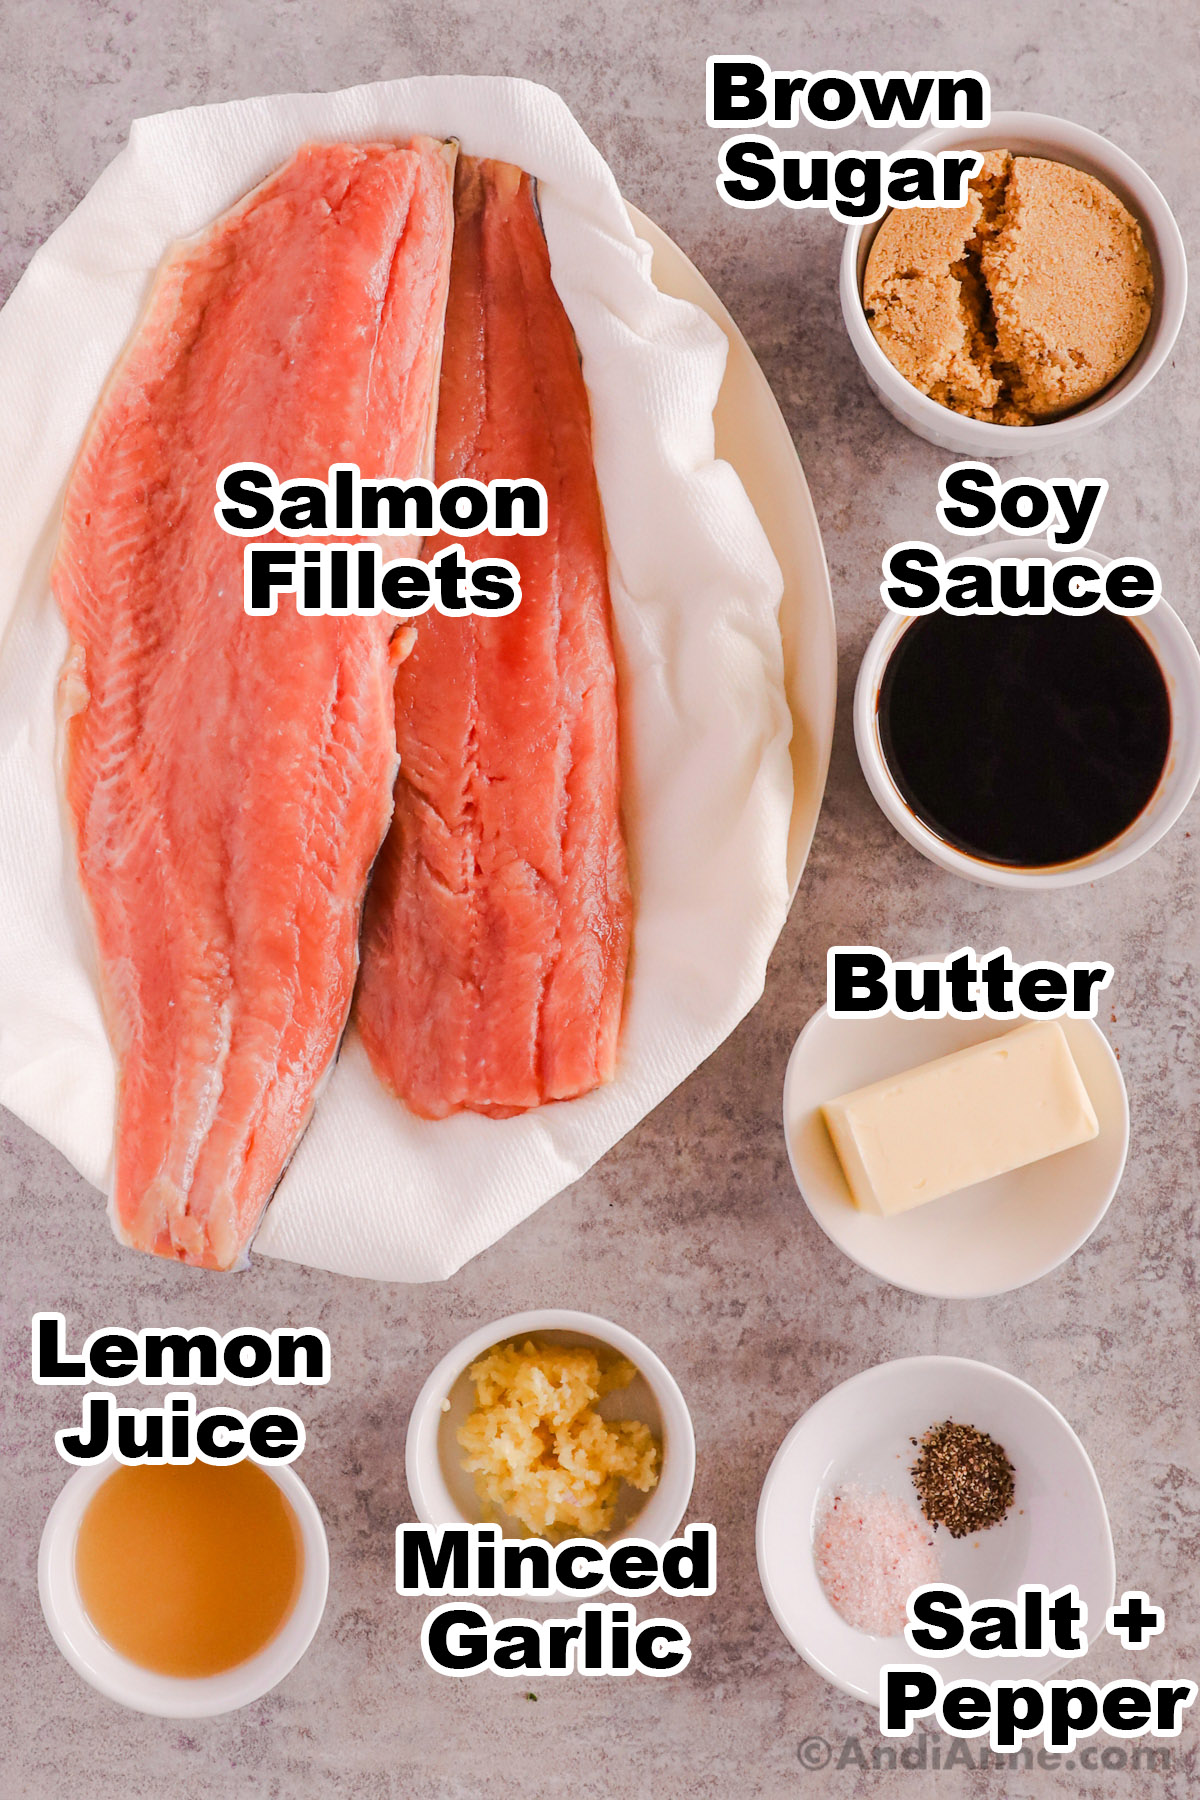 Recipe ingredients including raw salmon fillets, bowl of brown sugar, soy sauce, butter, lemon juice, minced garlic, salt and pepper.